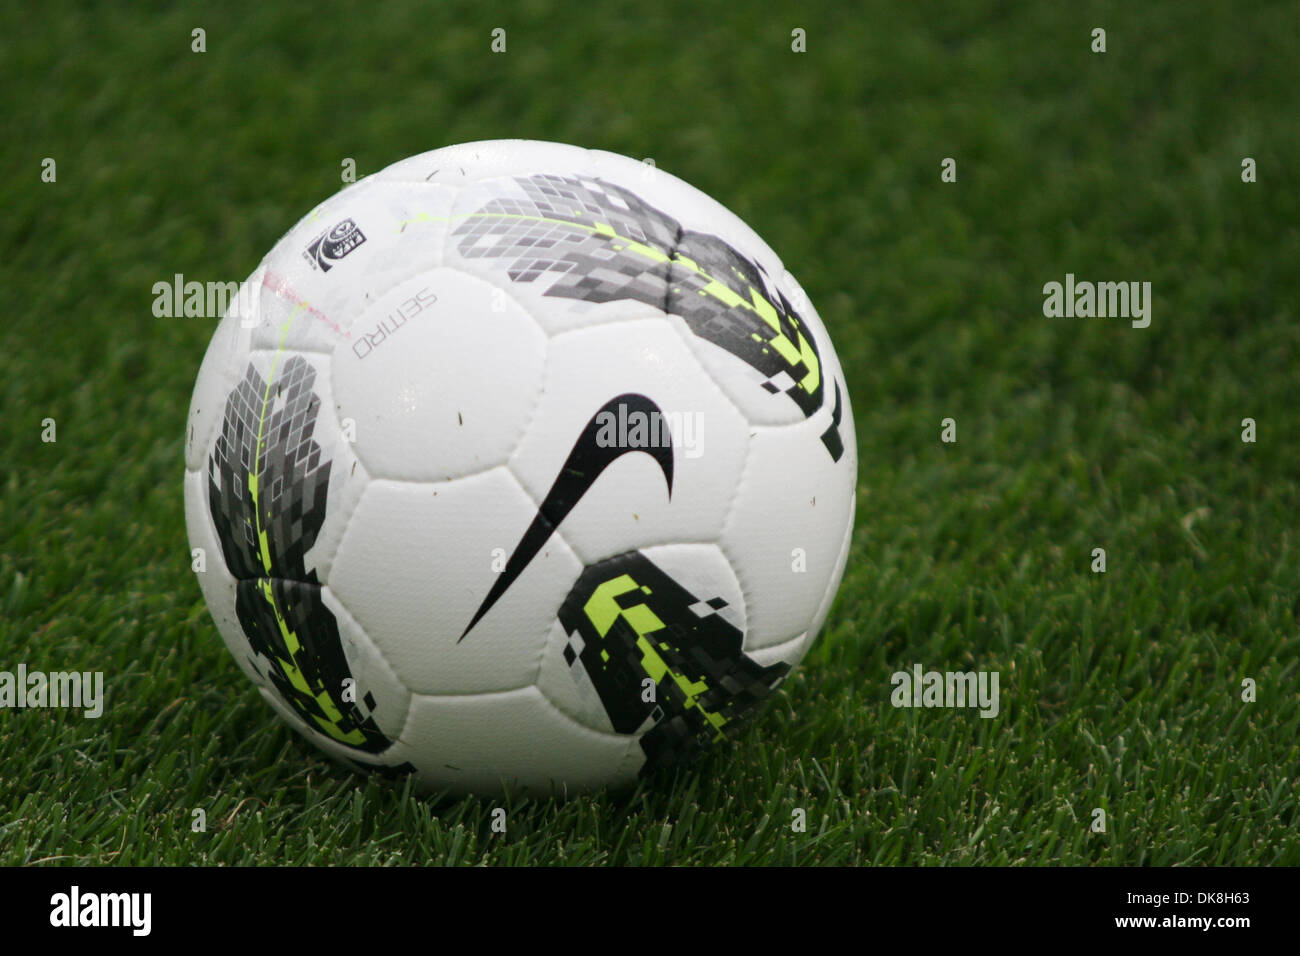 July 23, 2011 - Toronto, Ontario, Canada - The Nike game ball during the  Herbalife World Football Challenge soccer game between Juventus FC of Italy  and Sporting Clube de Portugal in Toronto,